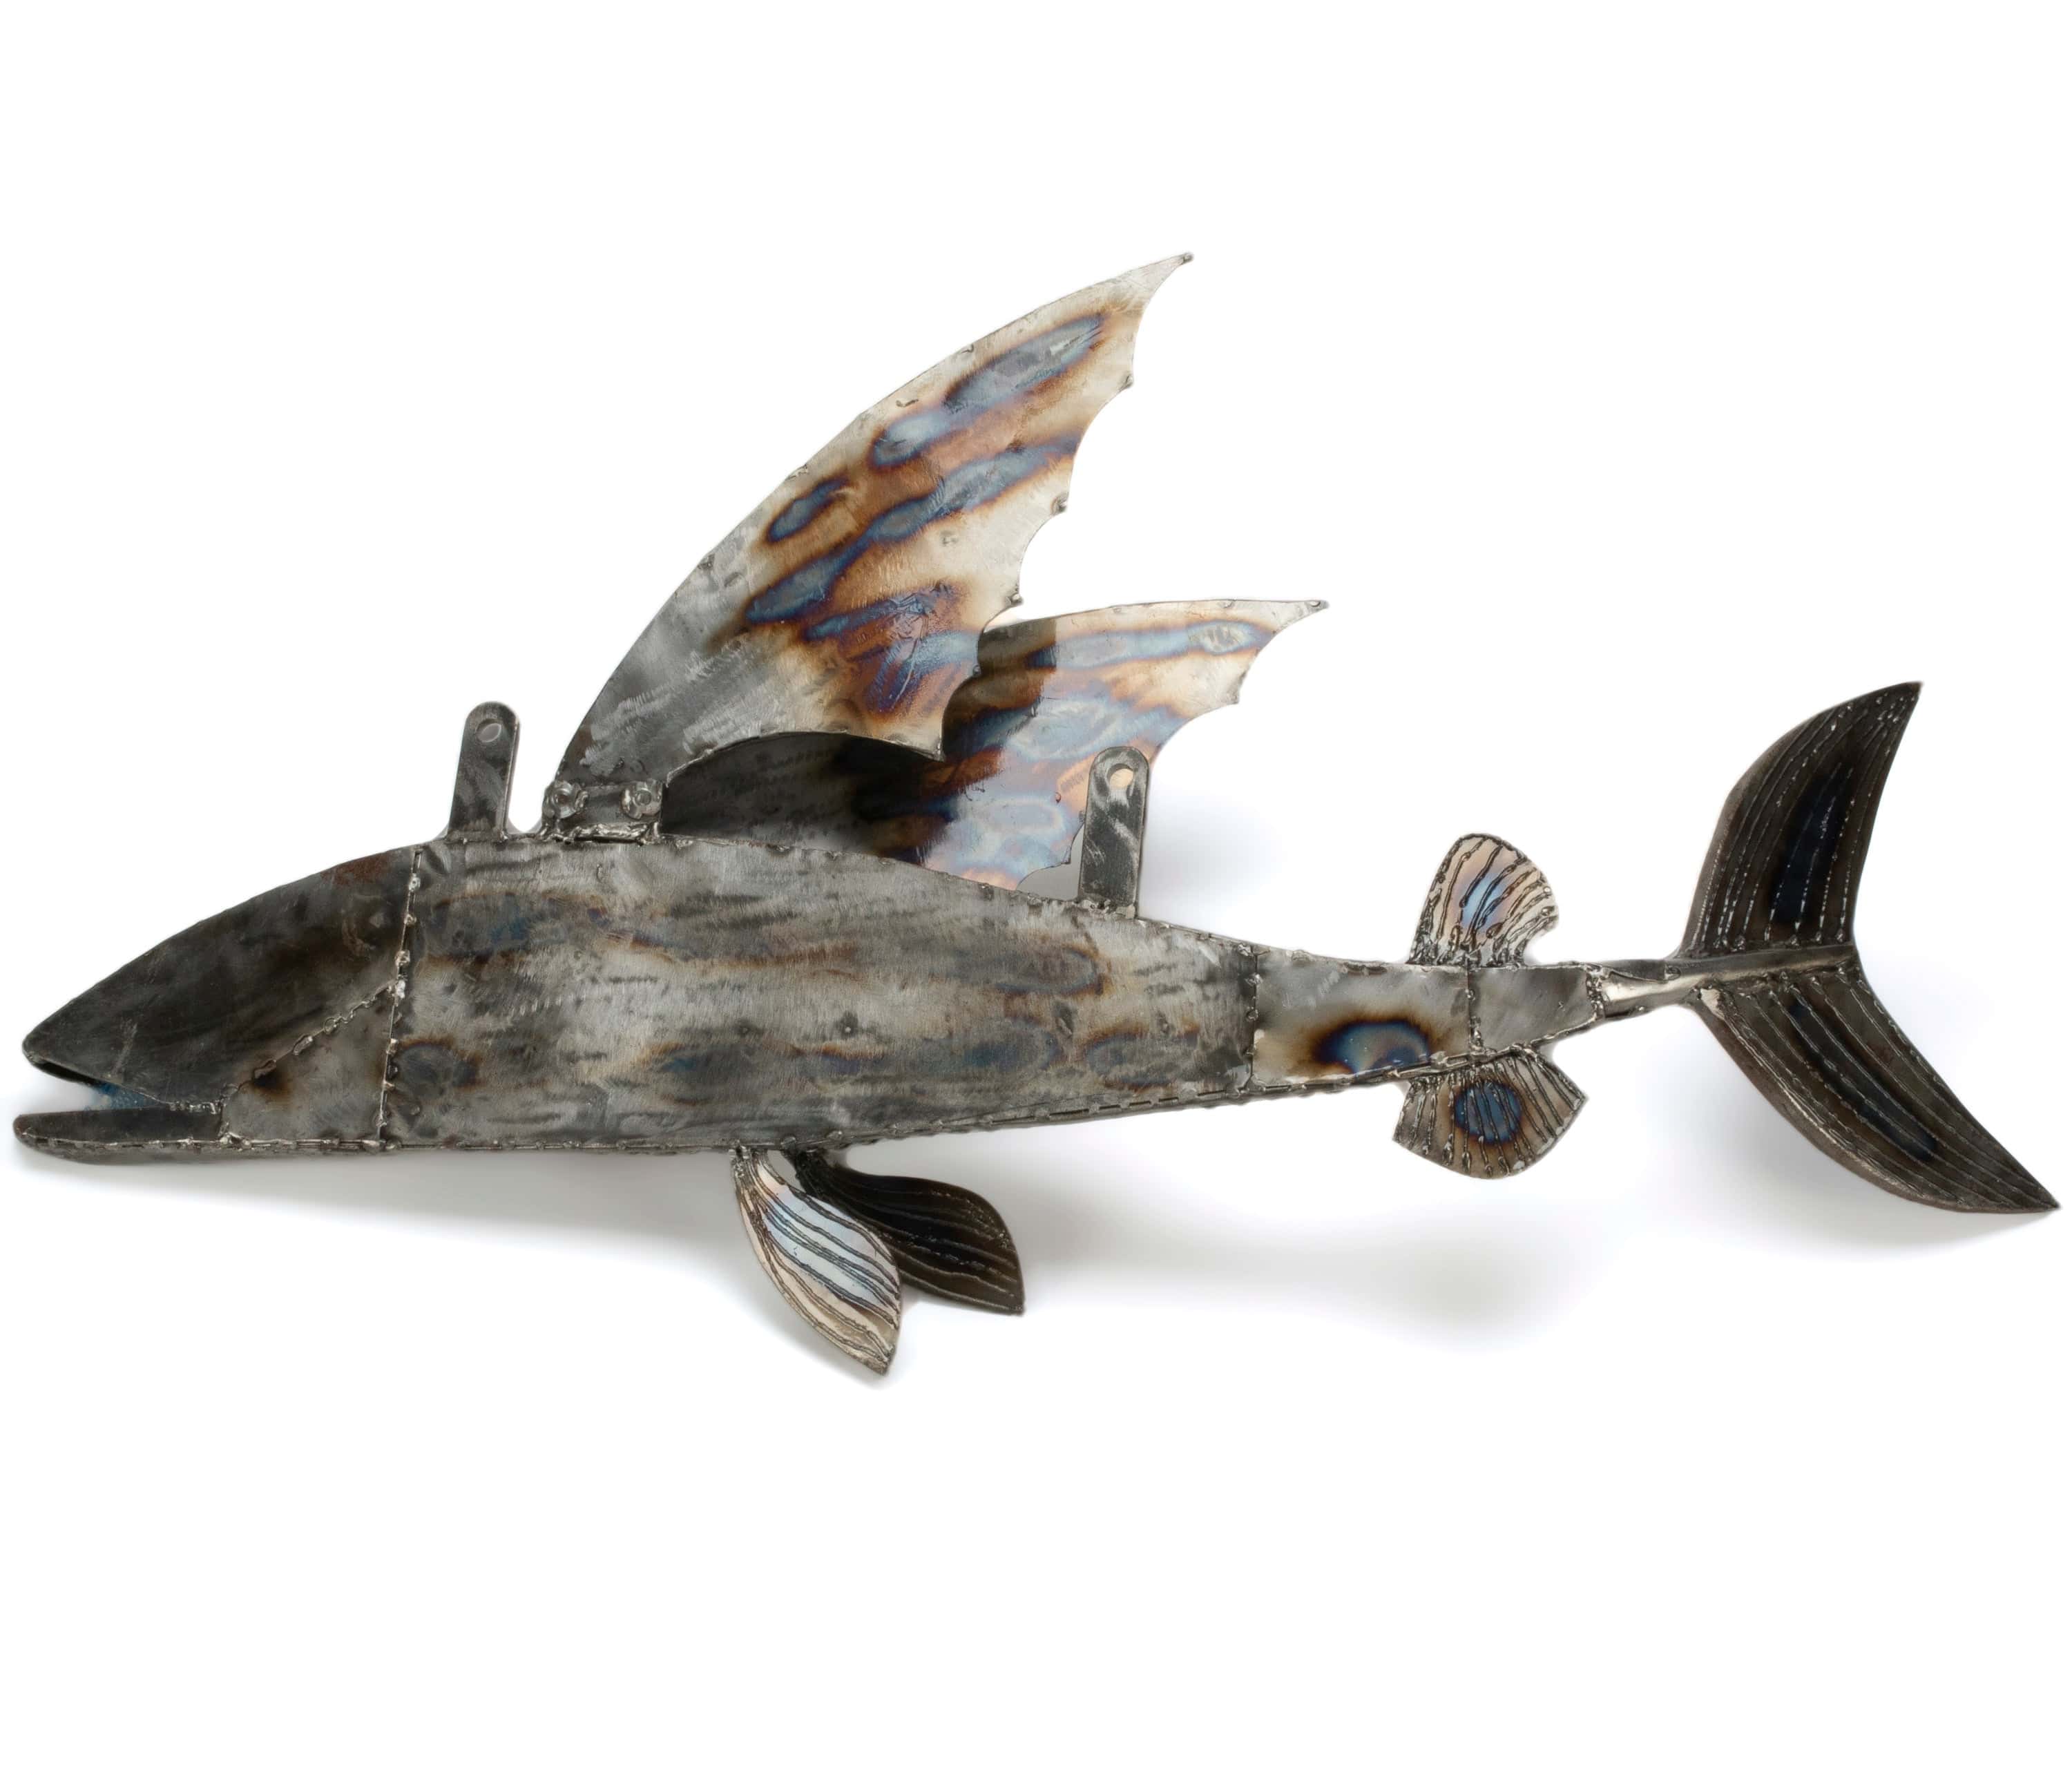 KALIFANO Recycled Metal Art 35" Flying Fish (Left) Inspired Recycled Metal Art Sculpture RMS-FFL88x55-PK